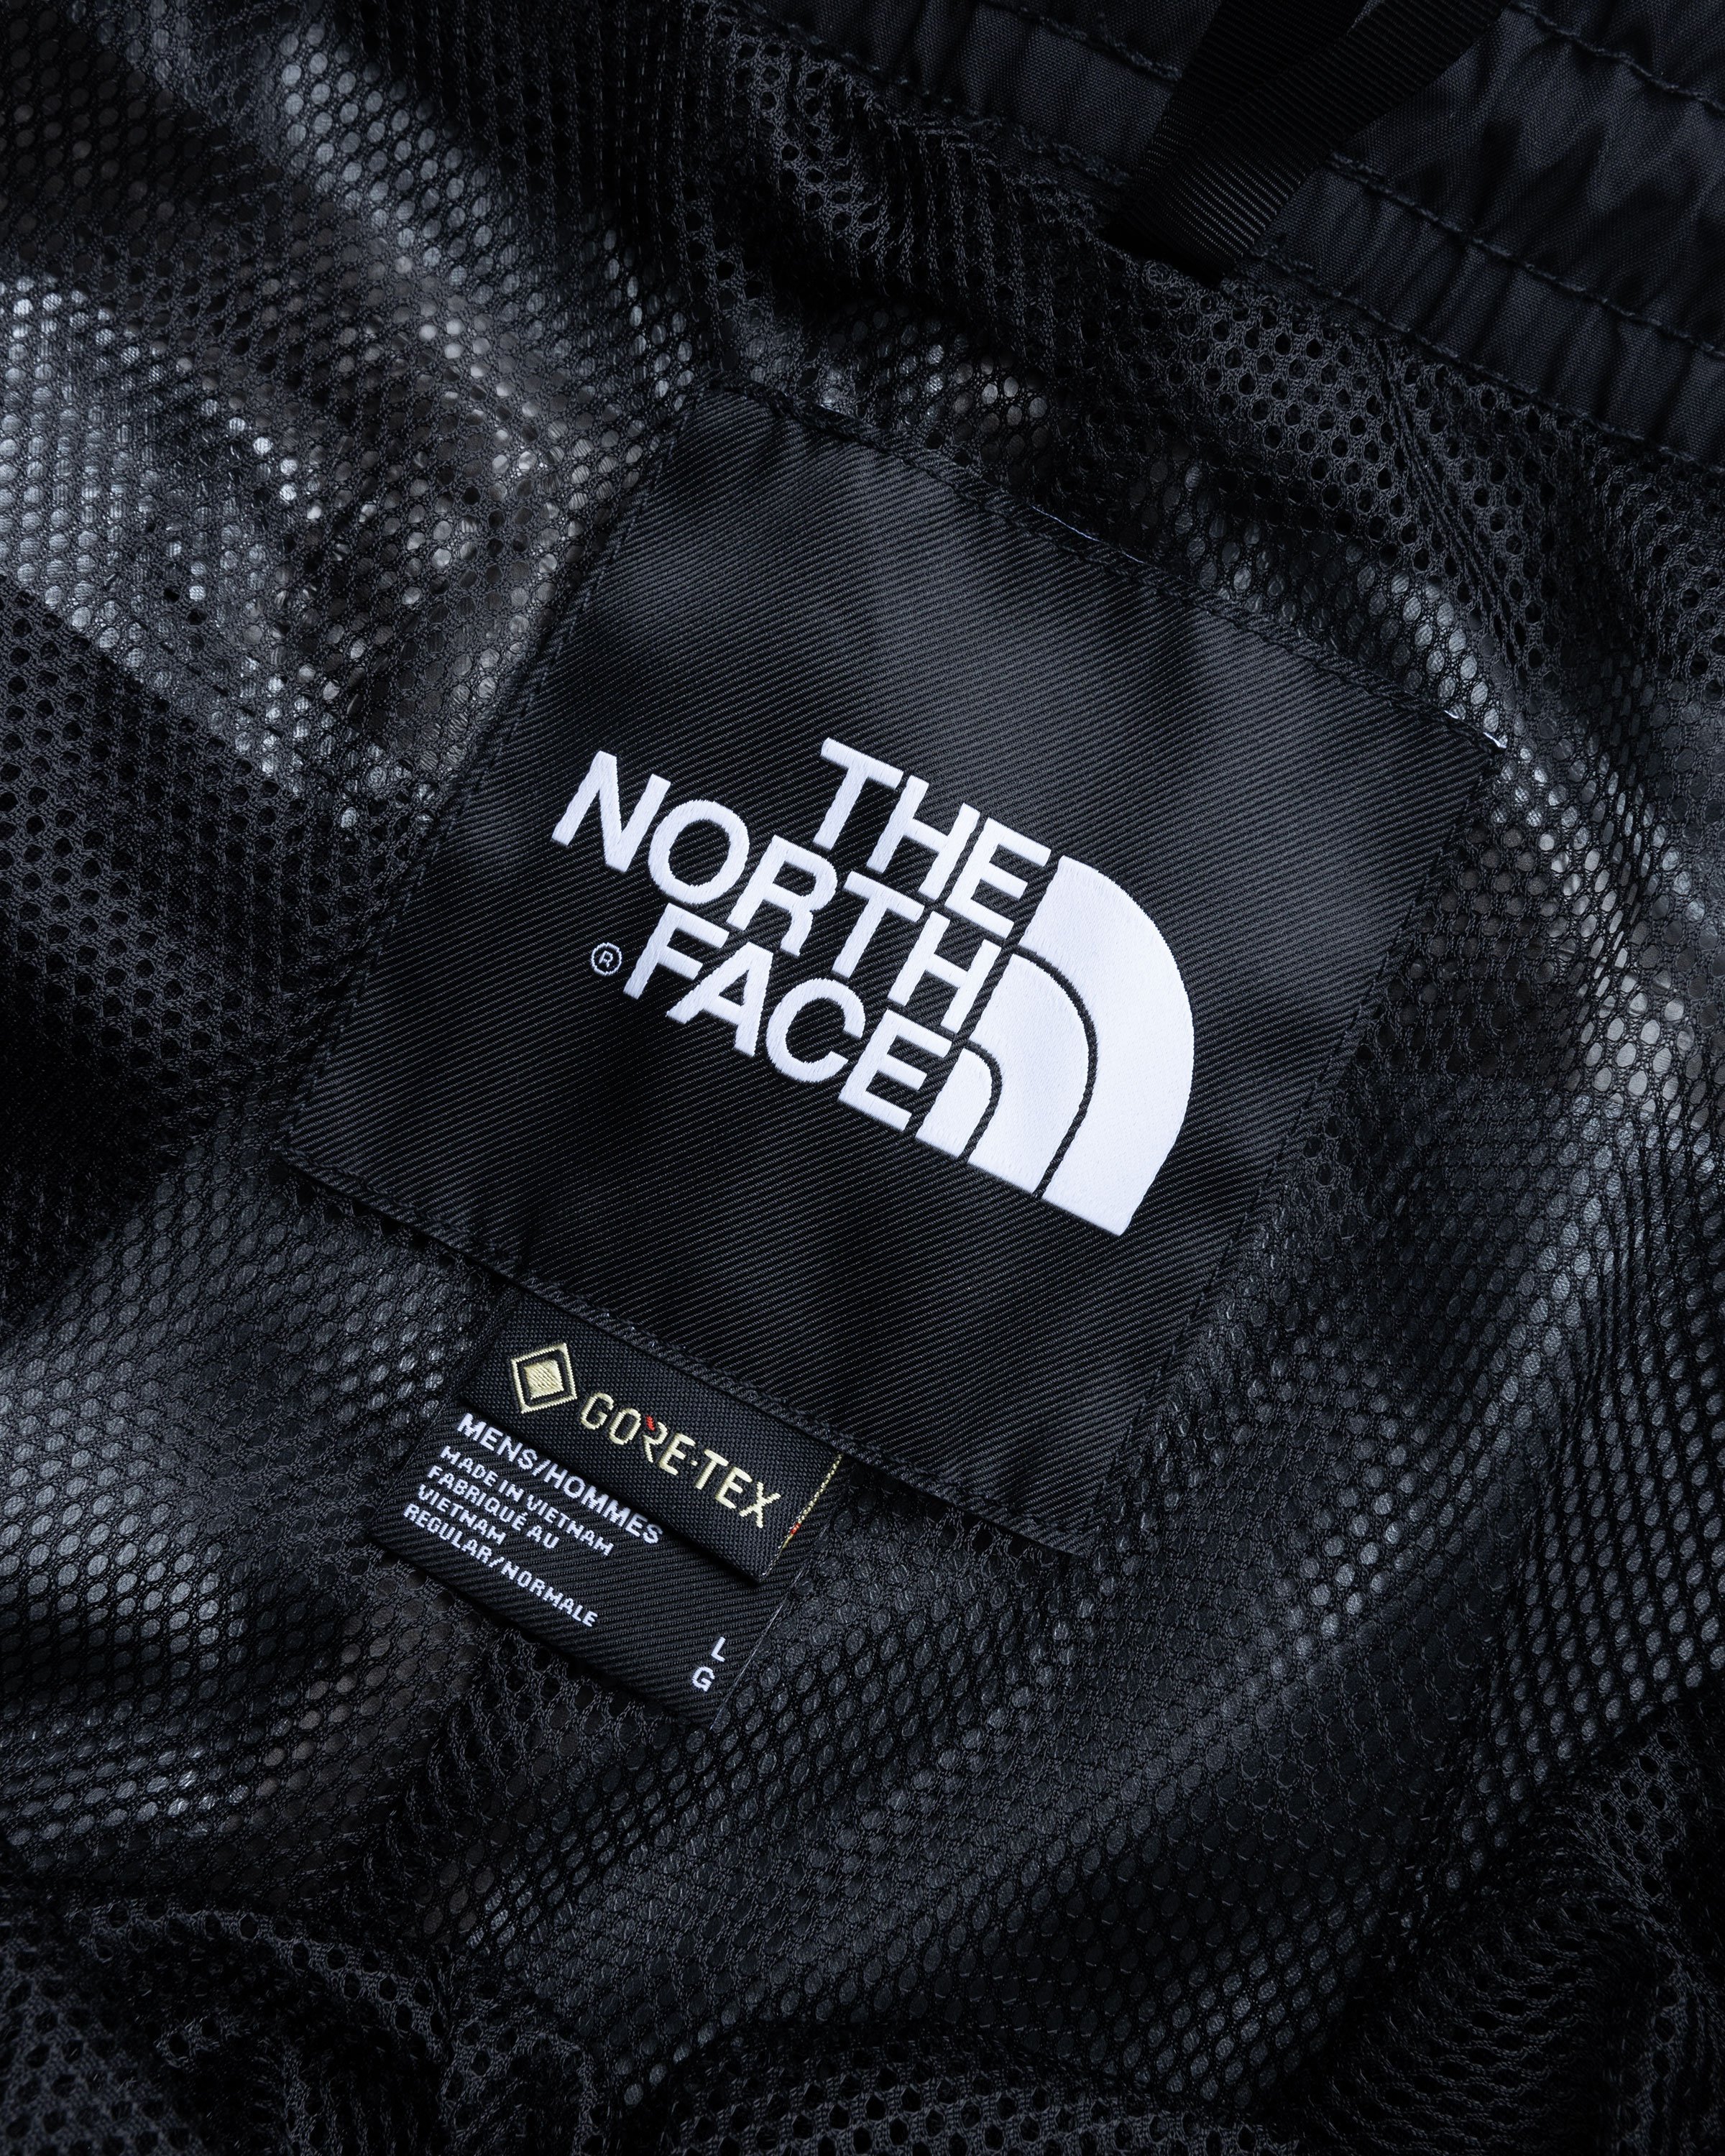 The North Face - GORE-TEX Mountain Pants Black - Clothing - Black - Image 7